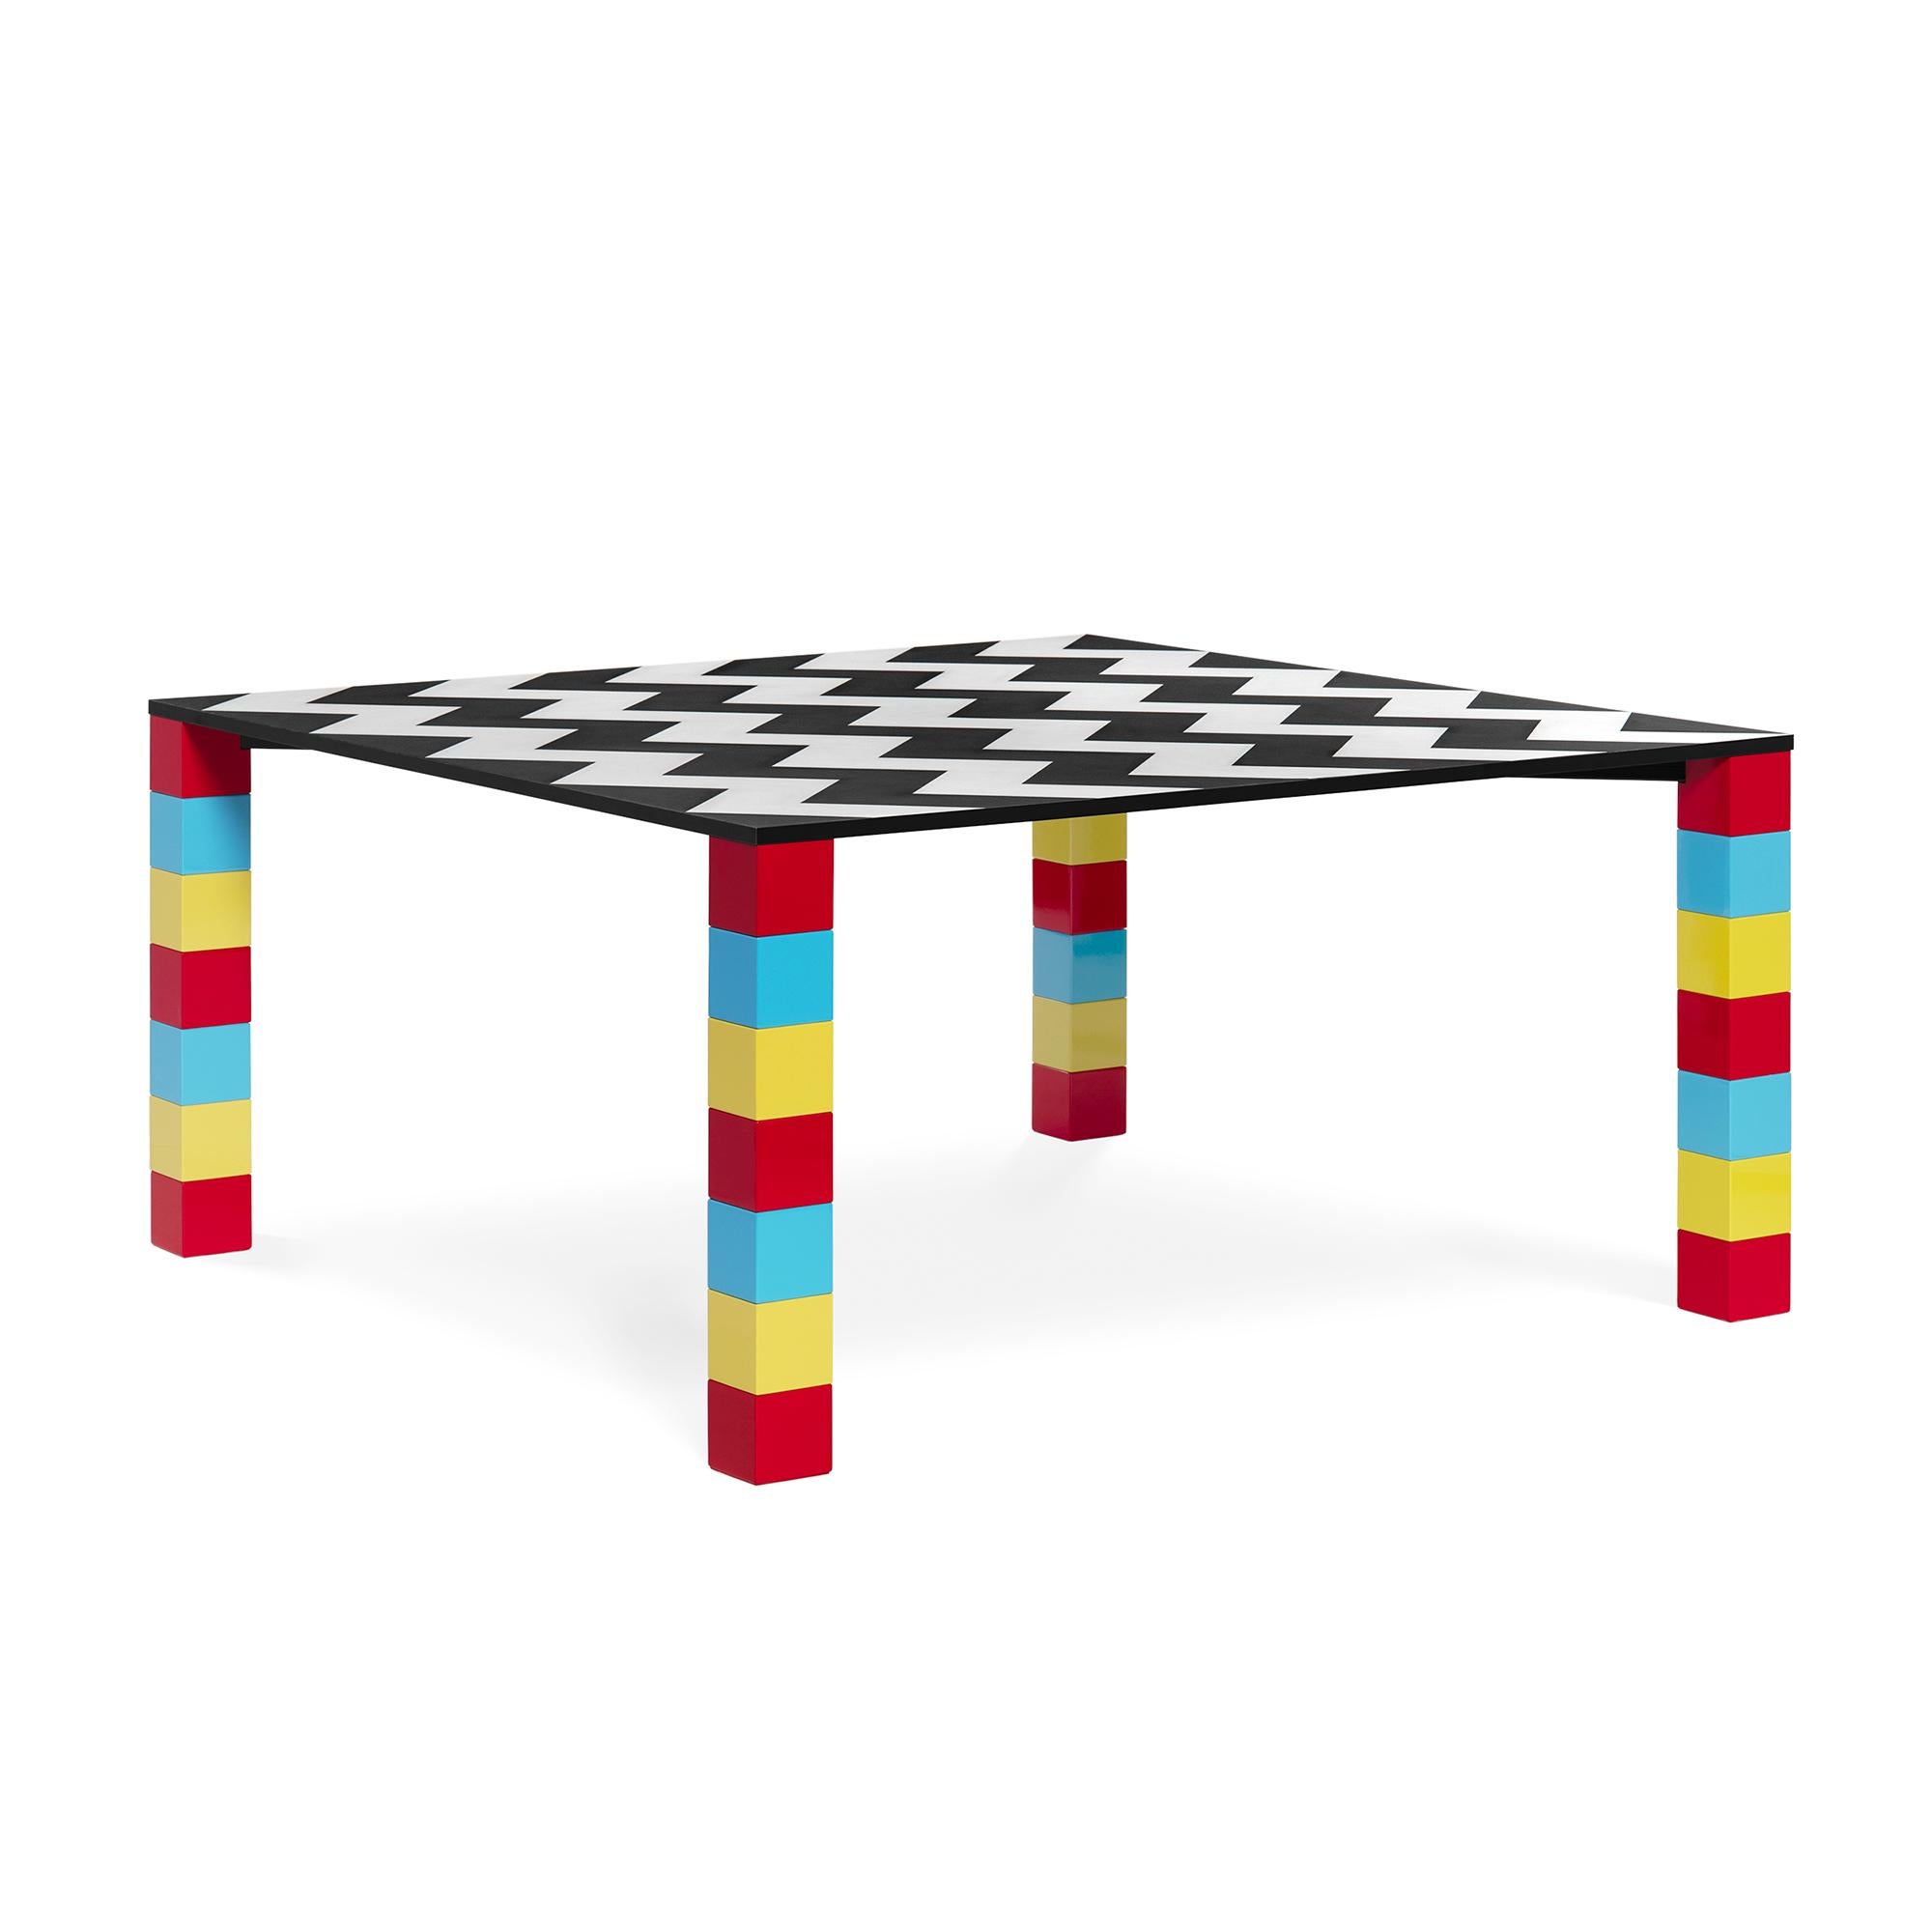 George J. Sowden
1981
Table made of lacquered wood and covered with decorative laminate, metal frame.
The surprising optical effect of Pierre is the result of the alternation of two vividly contrasting geometric patterns.
The colors and motifs